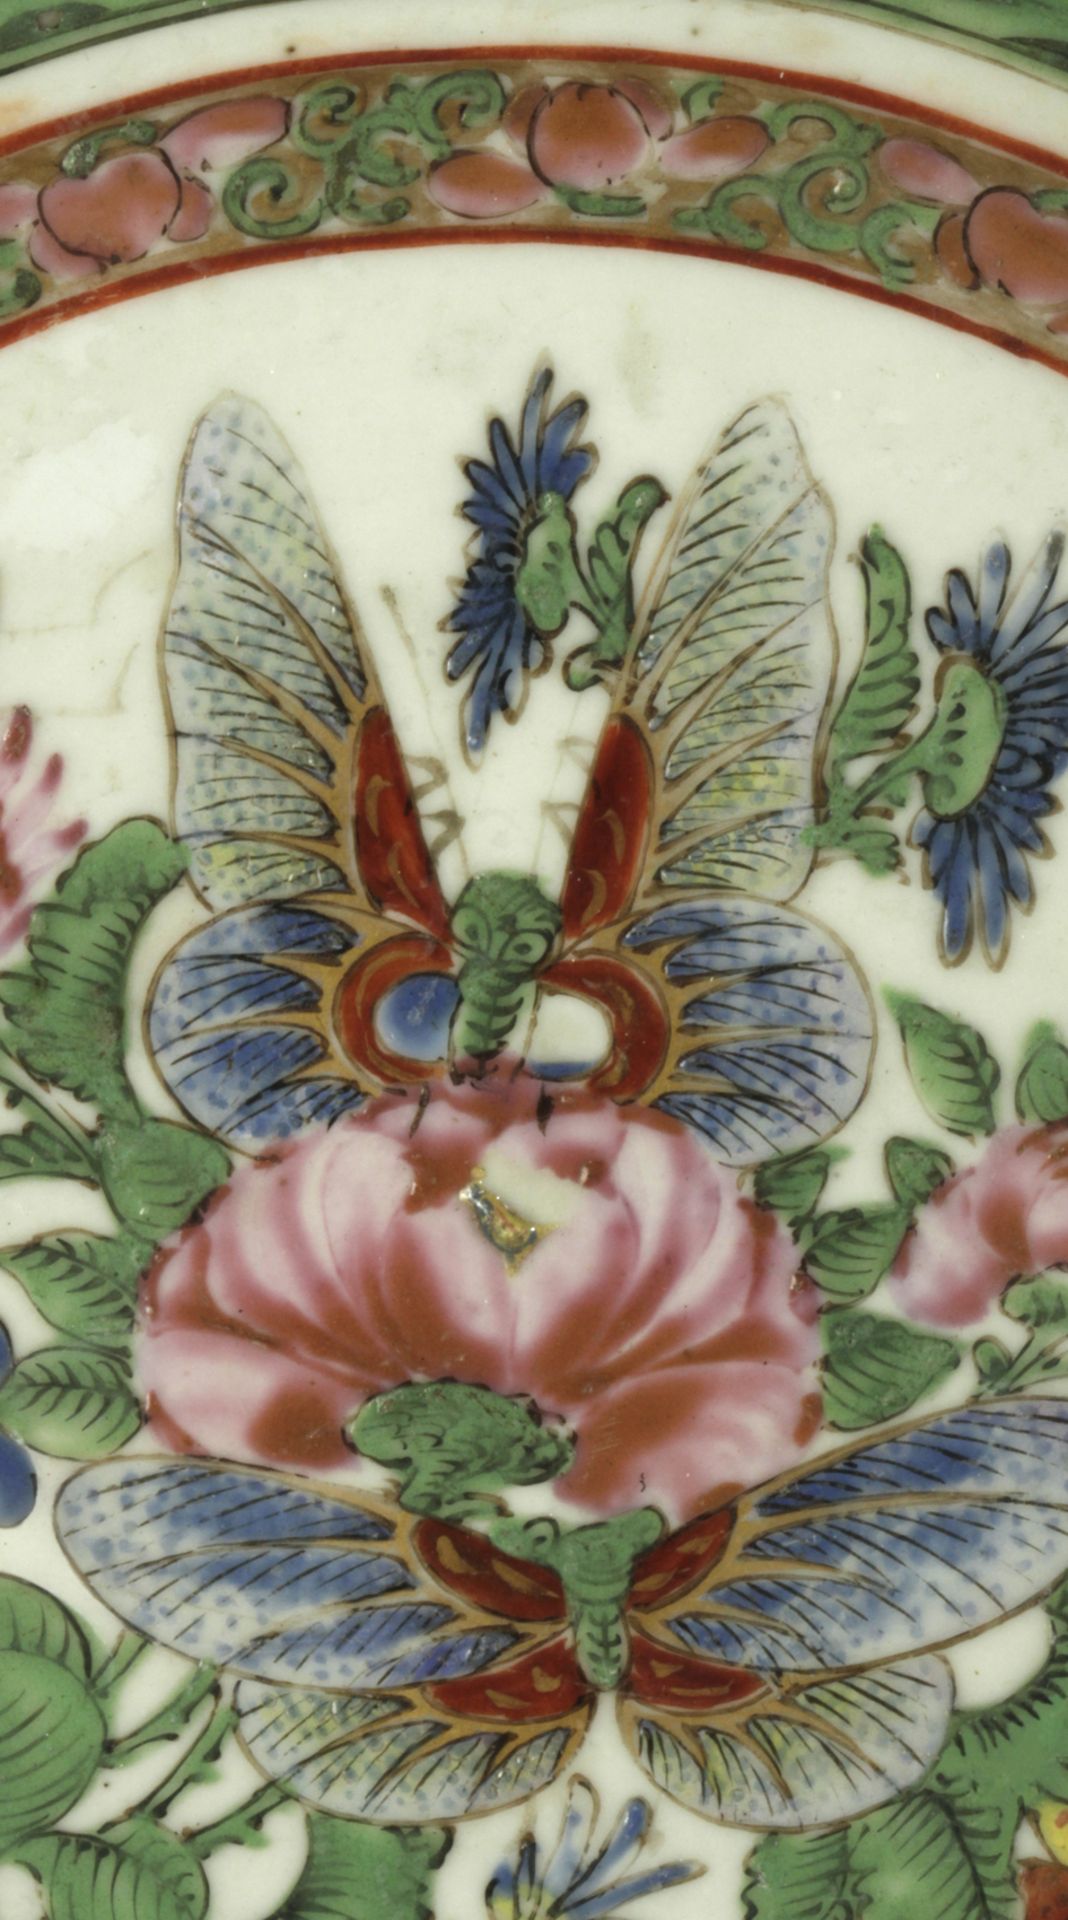 A 19th century Chinese Qing plate in Famille Rose porcelain - Image 3 of 4